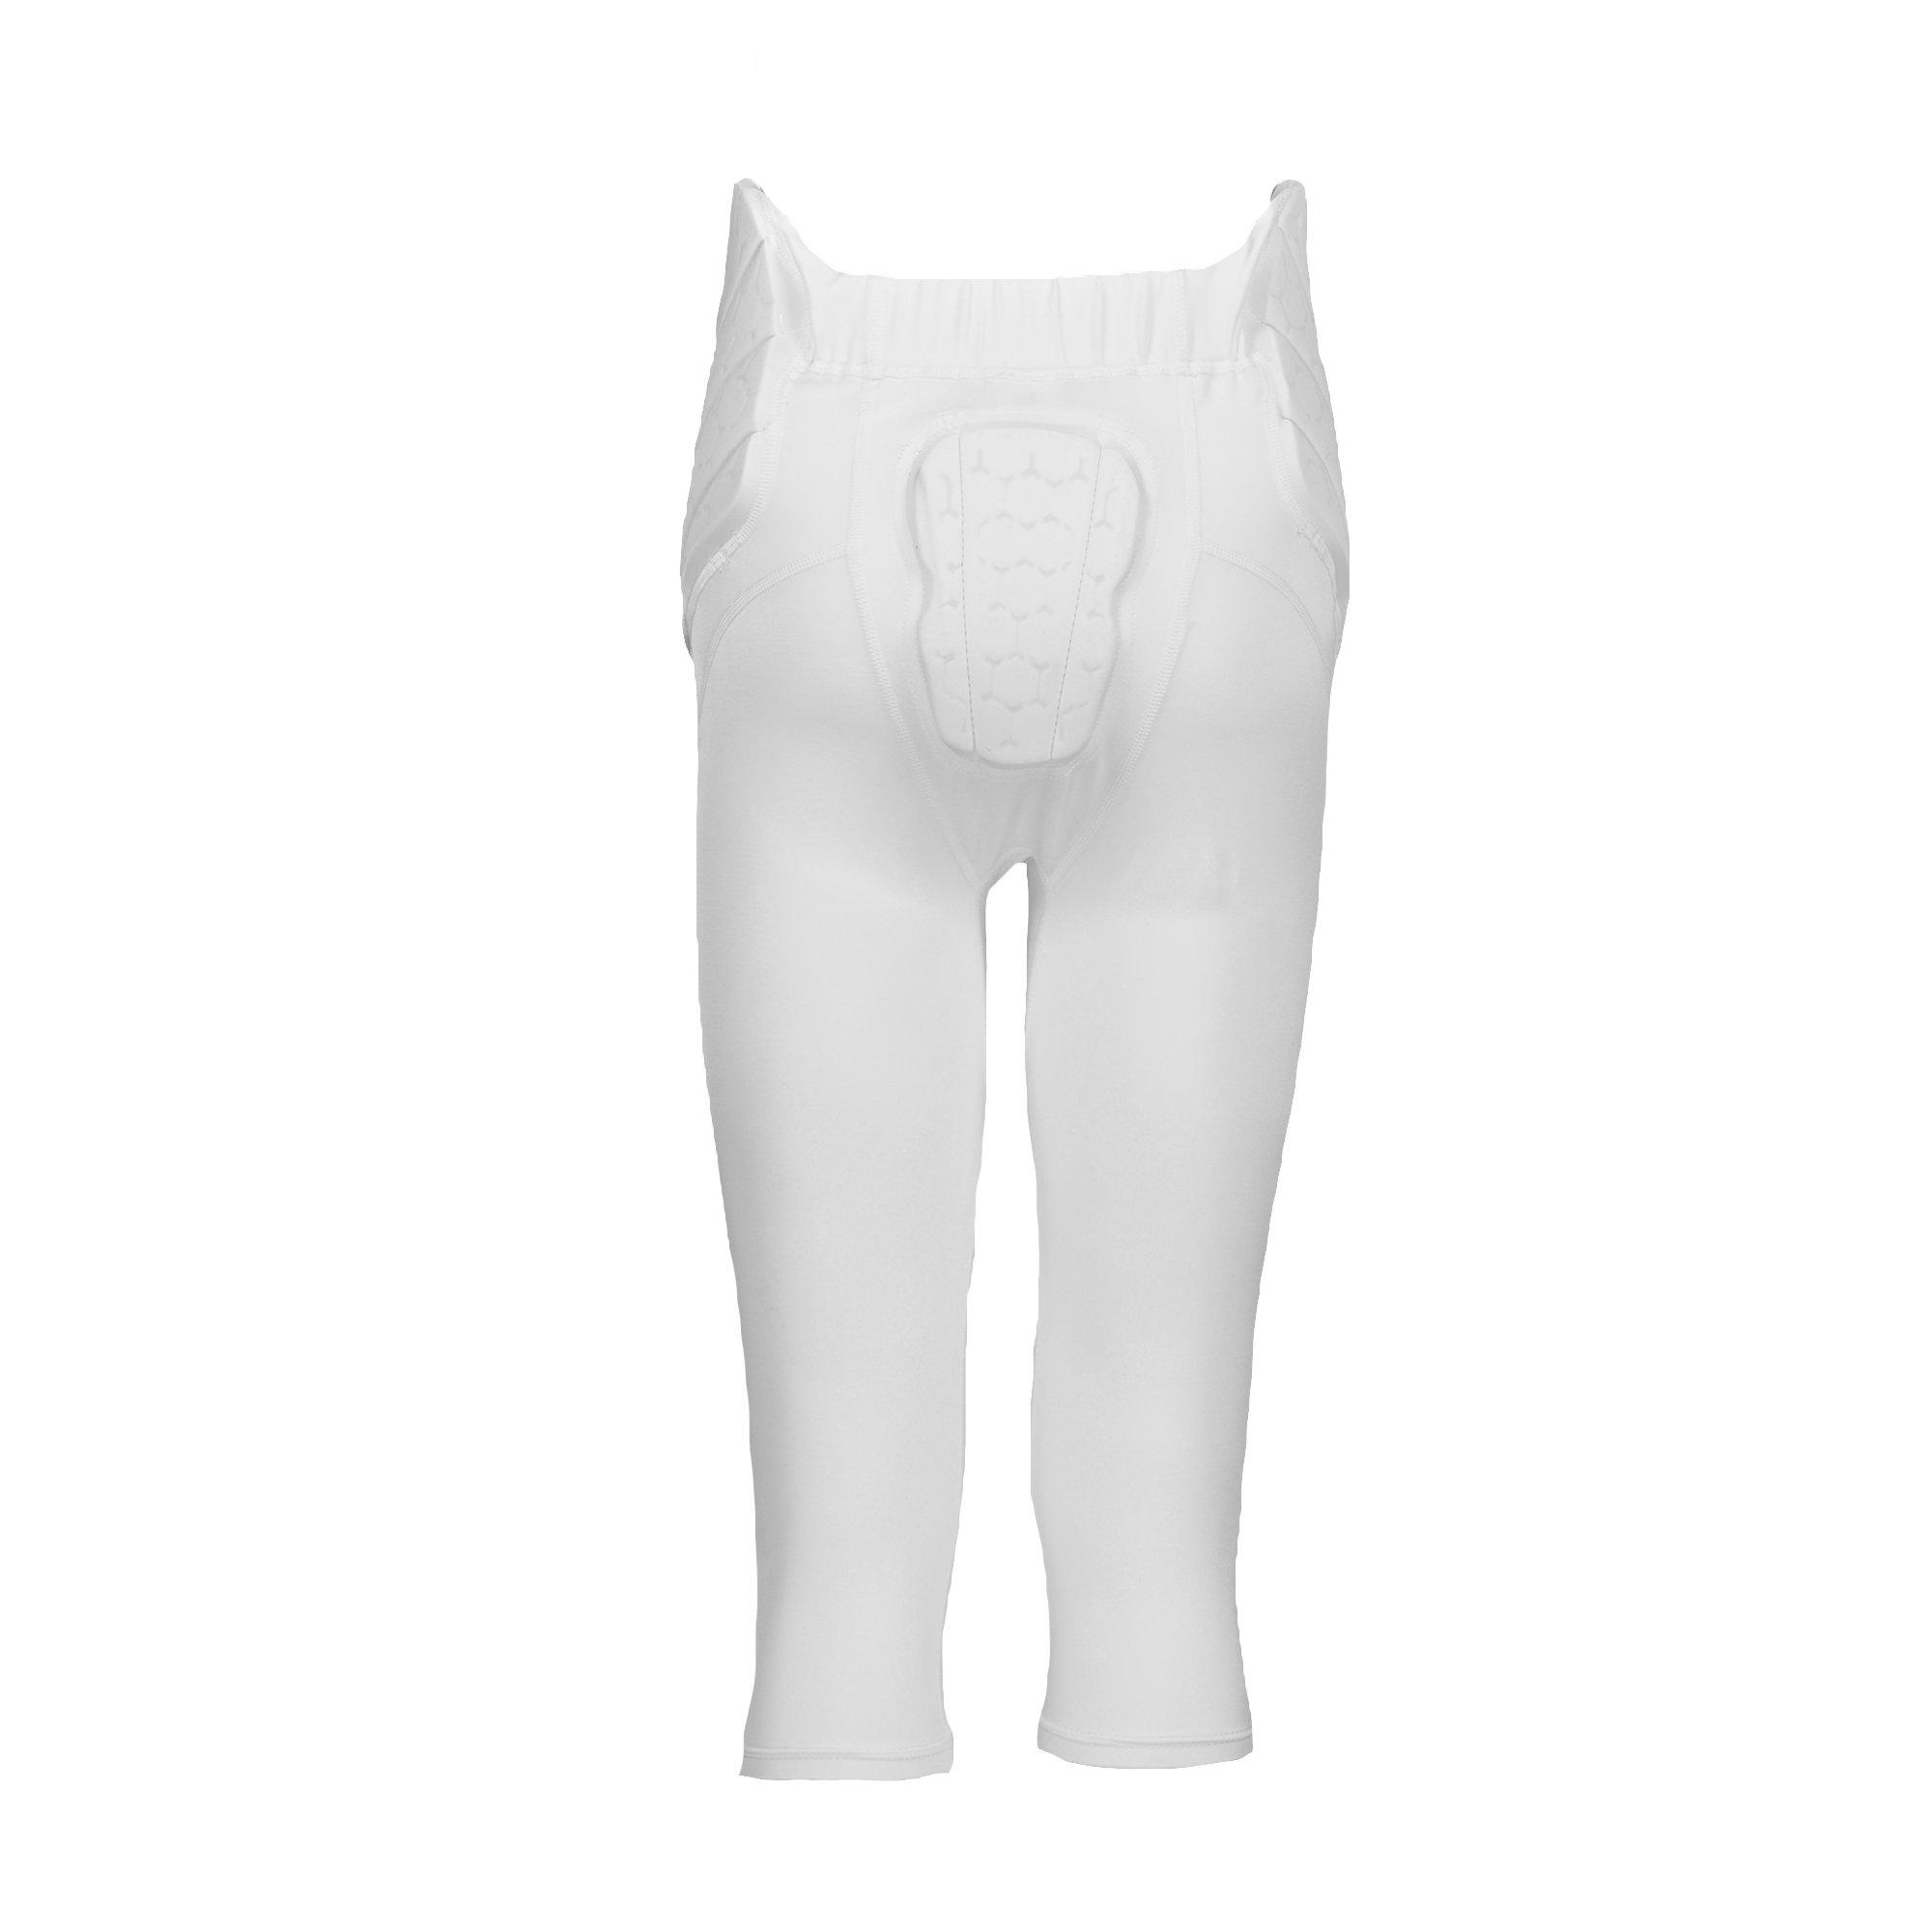 White below the knee pants Farmacell Fitness Shape